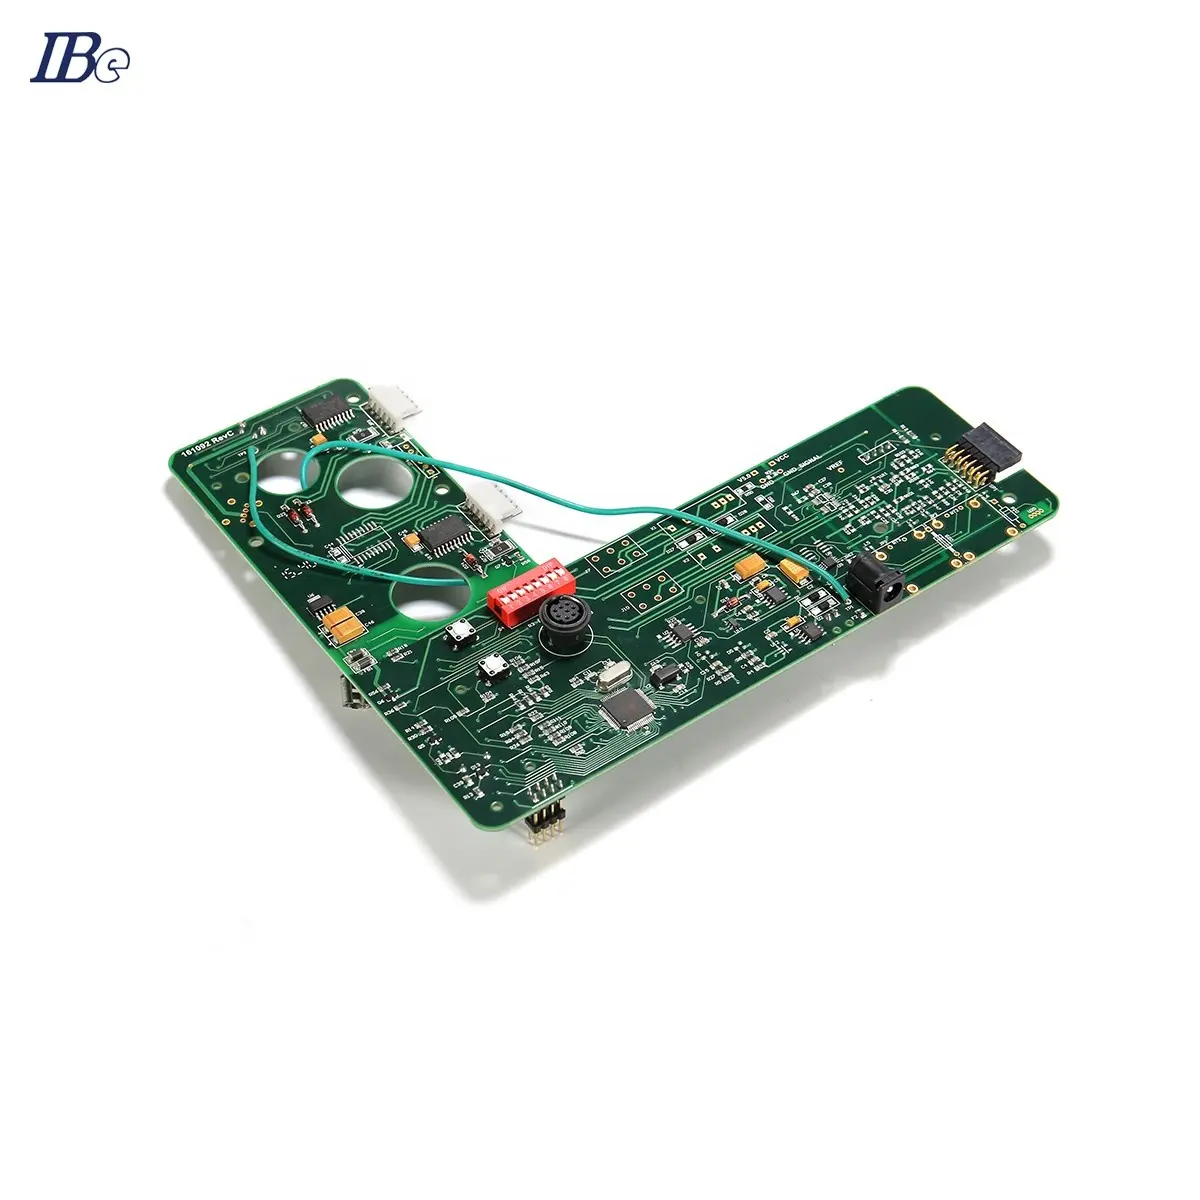 Electronics alarm system 94v0 pcb manufacturing and assembly professional one stop Turnkey PCBA service